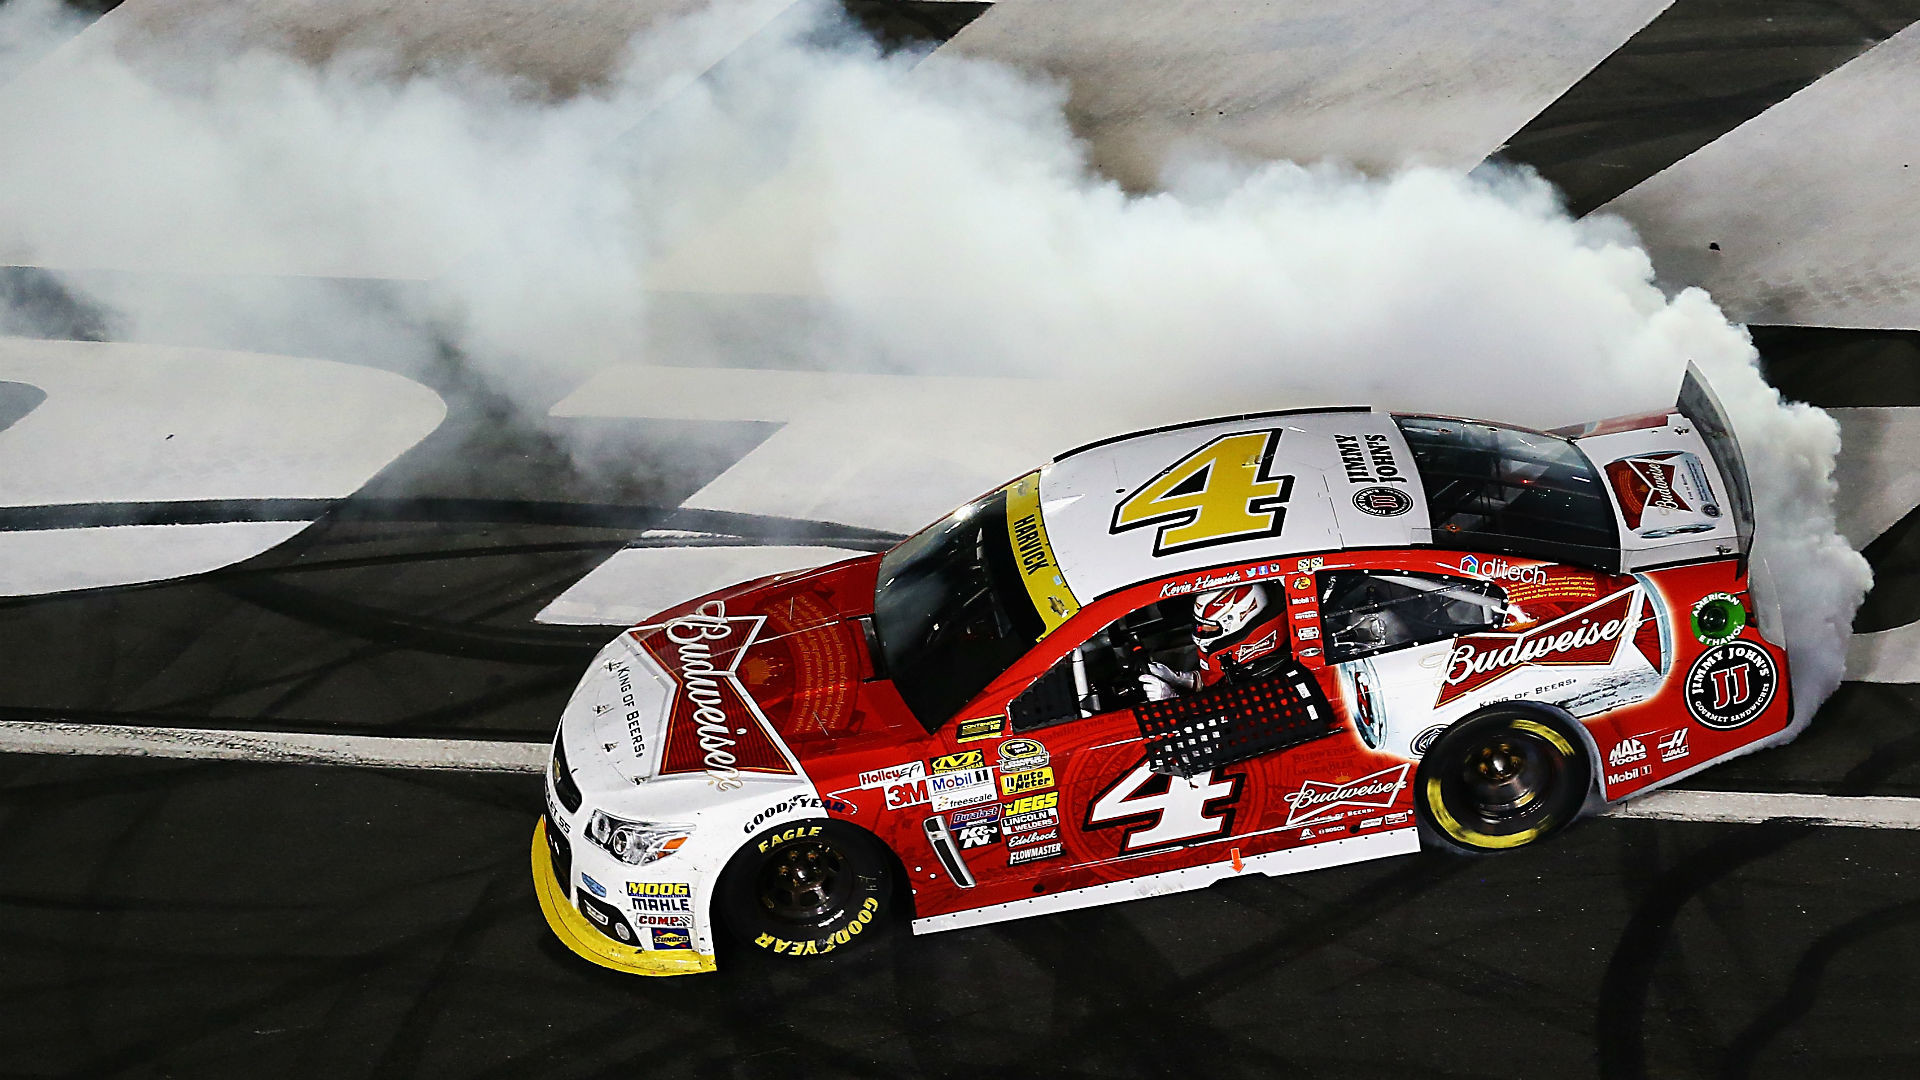 1920x1080  Kevin Harvick wins as fight erupts after Cup race at Charlotte |  NASCAR | Sporting News